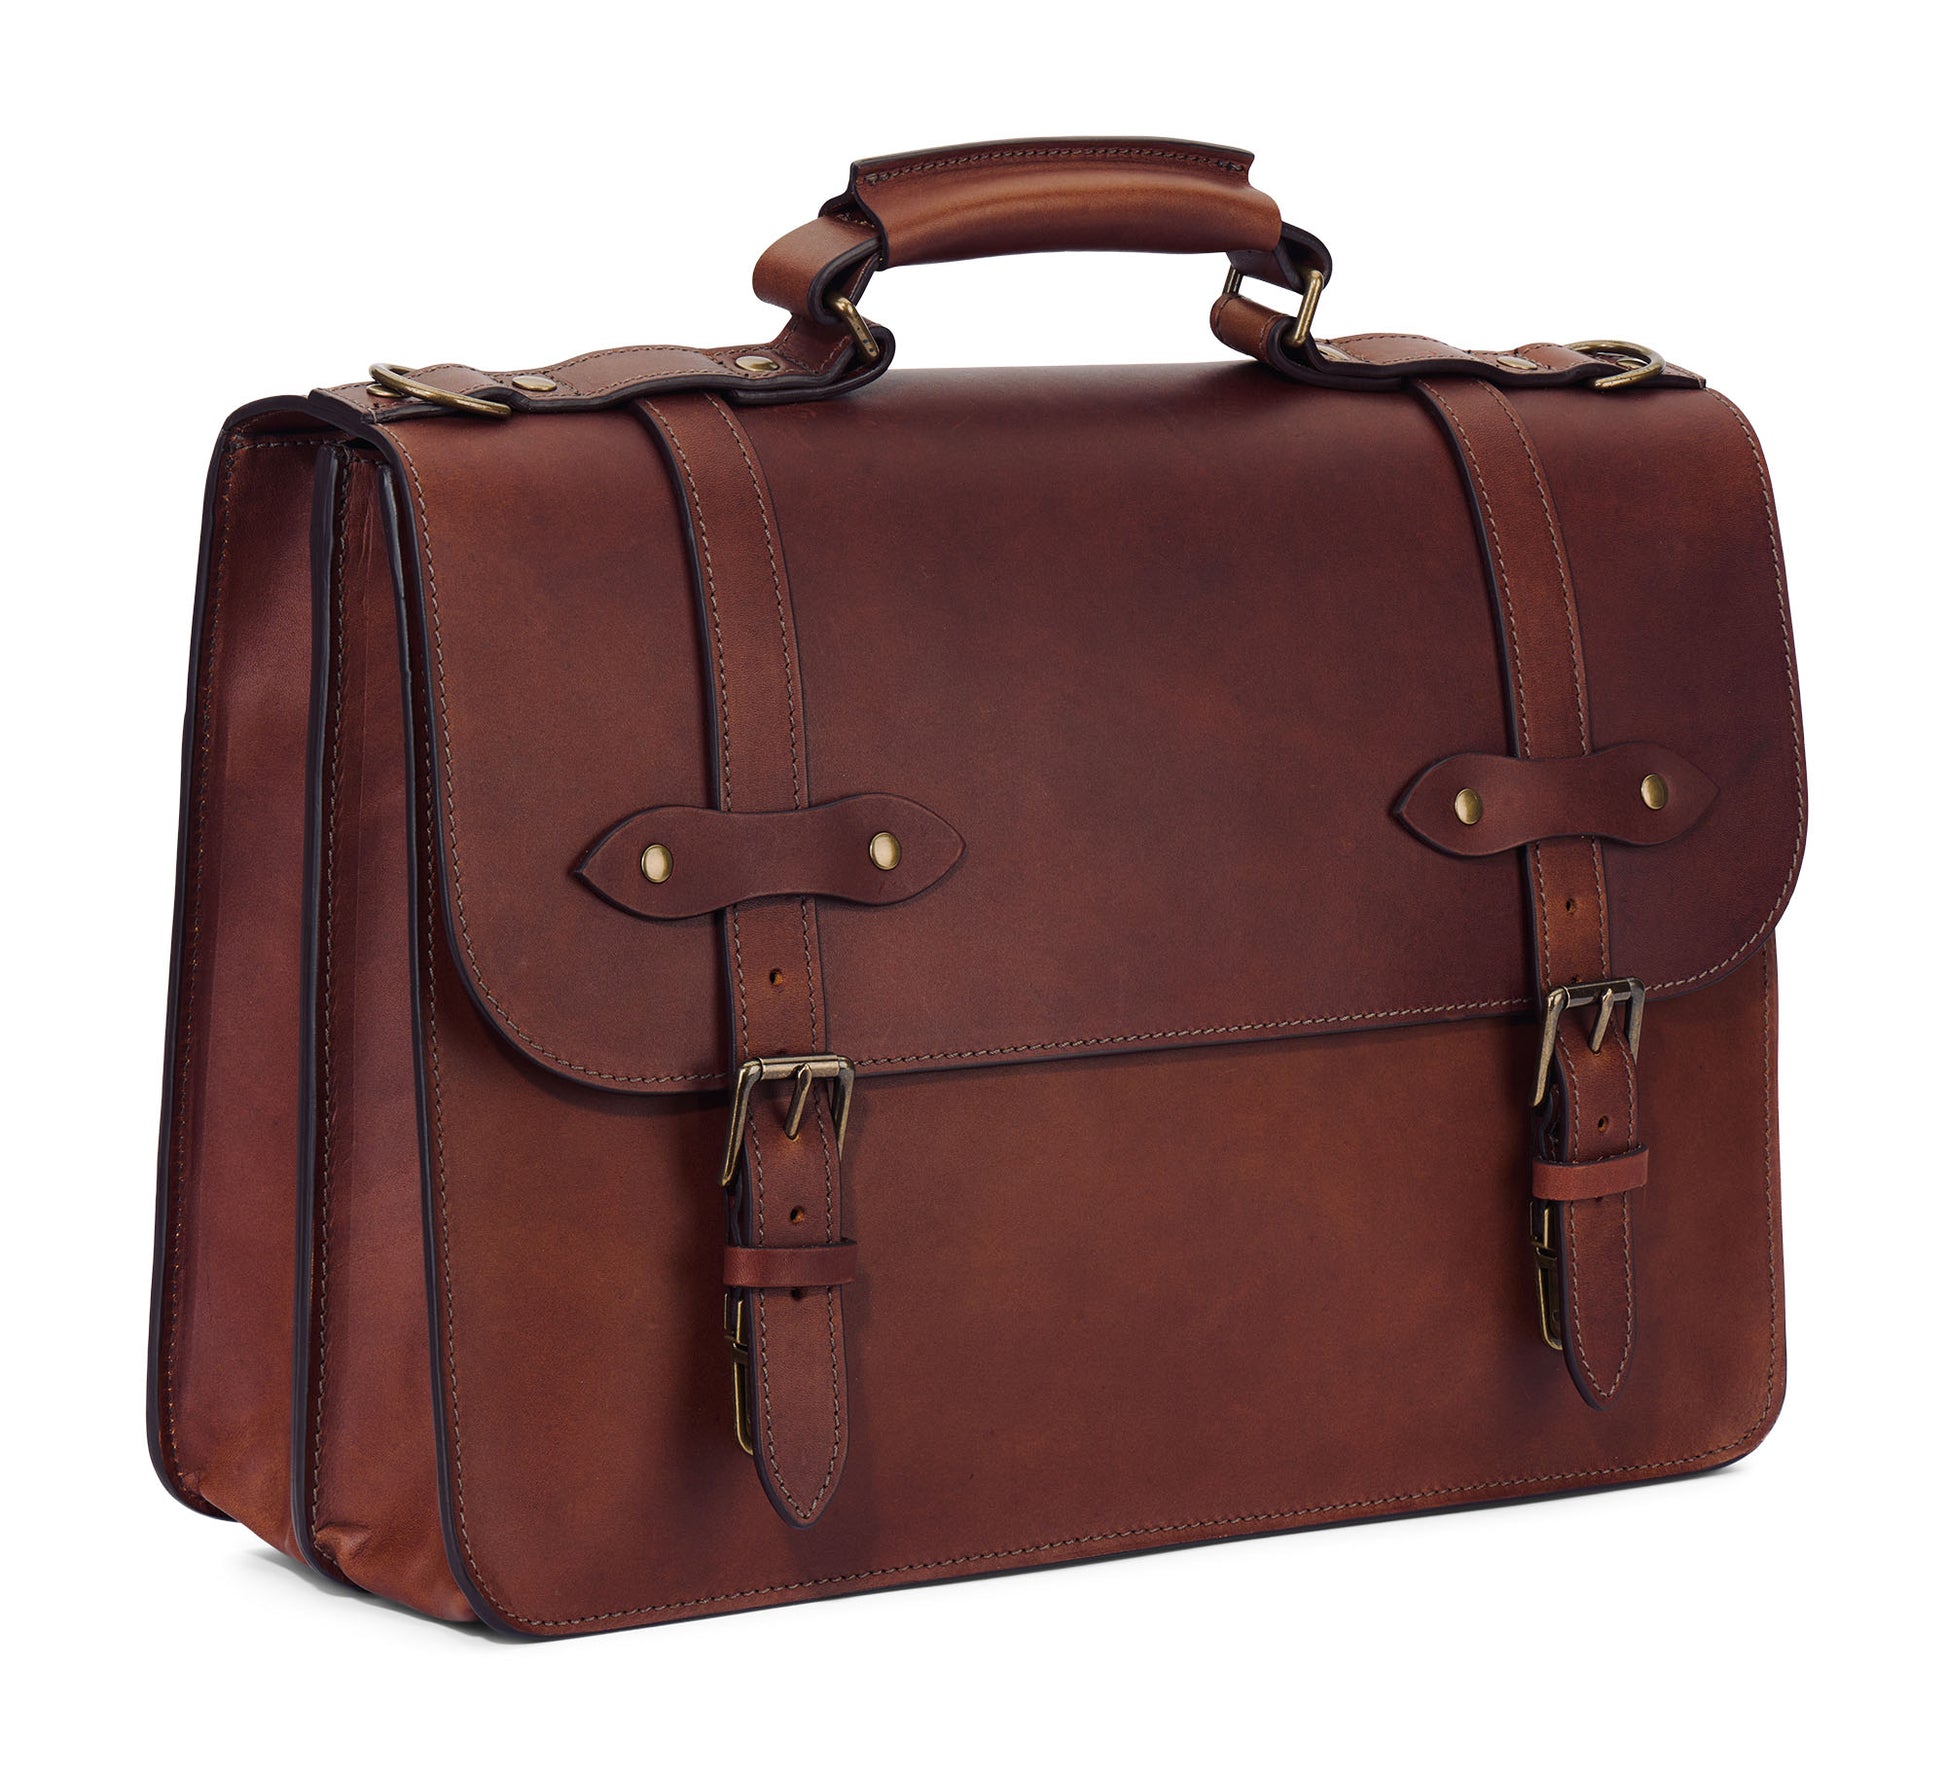 leather briefcase for lawyers - litigator's briefcase - Esq. Briefcase by Jackson Wayne